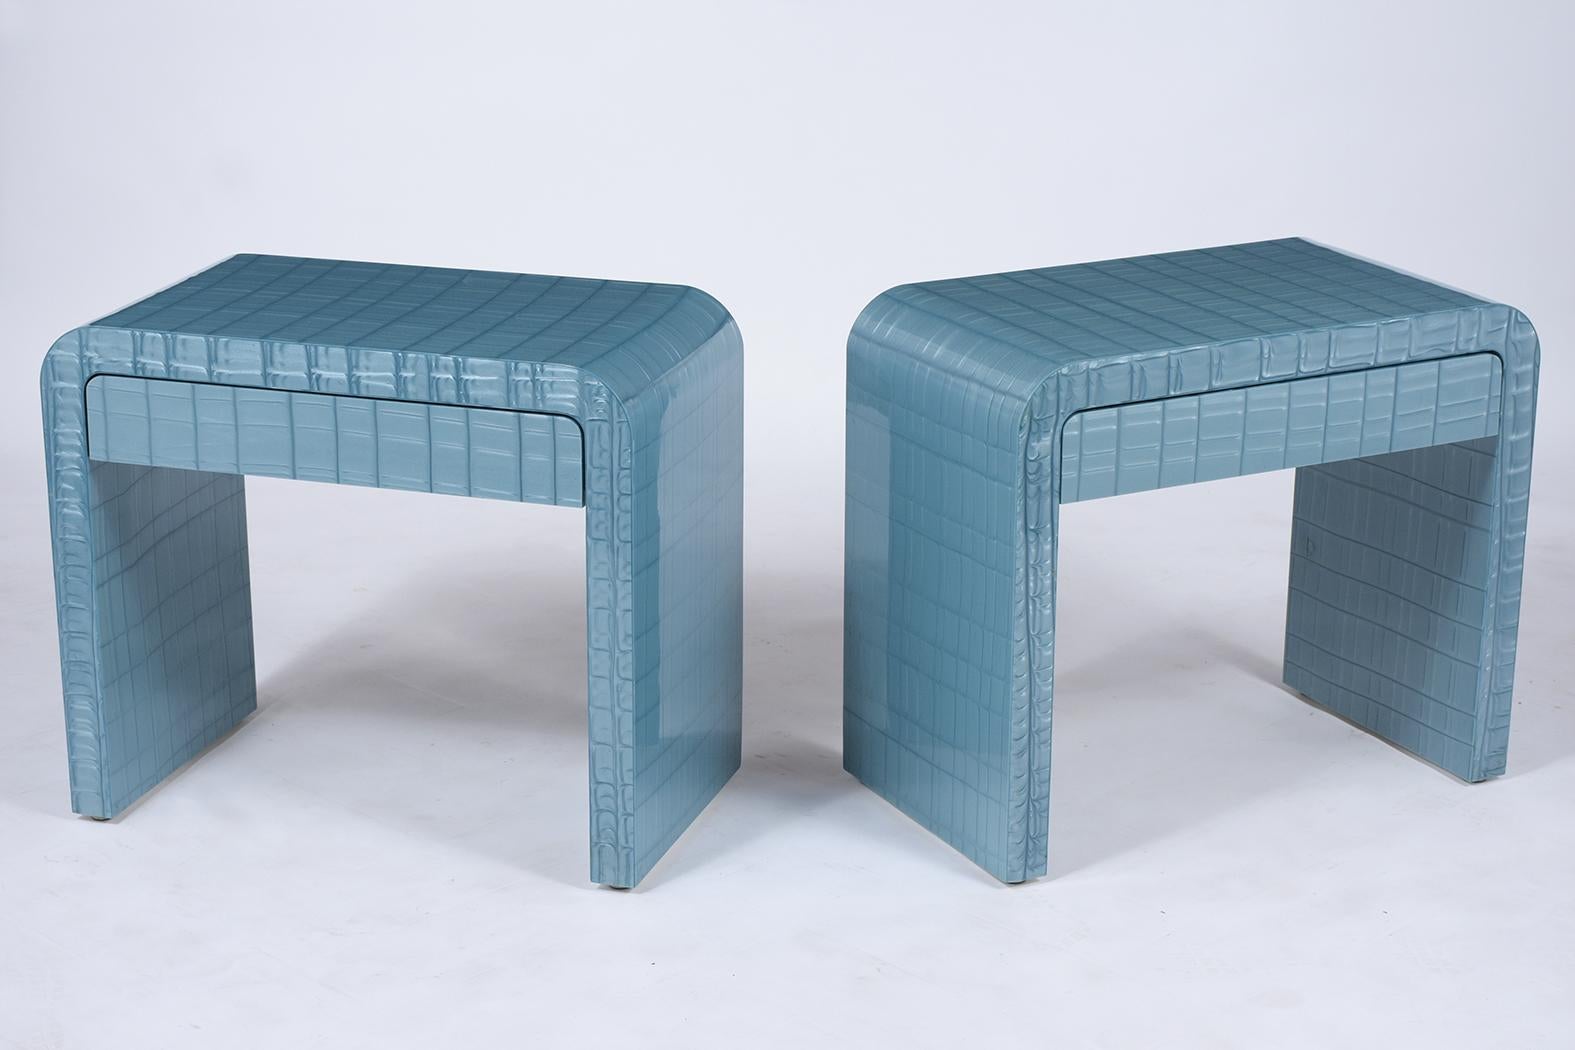 A fabulous pair of vintage modern nightstands handcrafted out of wood finely covered with a faux alligator laminate veneer and is fully restored. This pair of sleek design side tables feature a unique blue color U-shape and a single drawer that